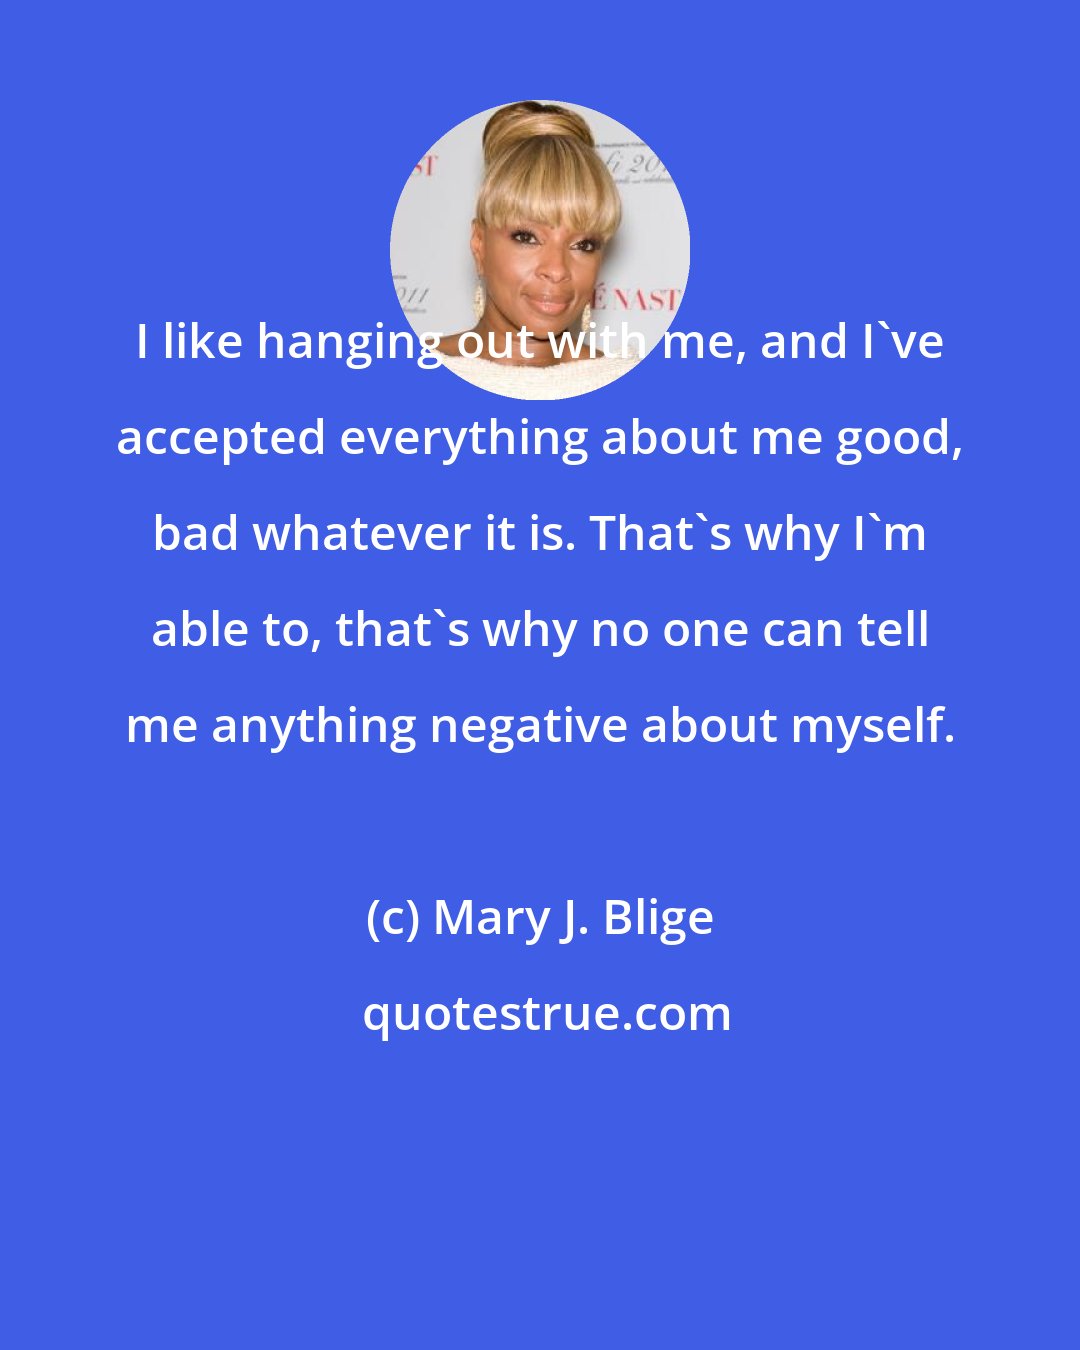 Mary J. Blige: I like hanging out with me, and I've accepted everything about me good, bad whatever it is. That's why I'm able to, that's why no one can tell me anything negative about myself.